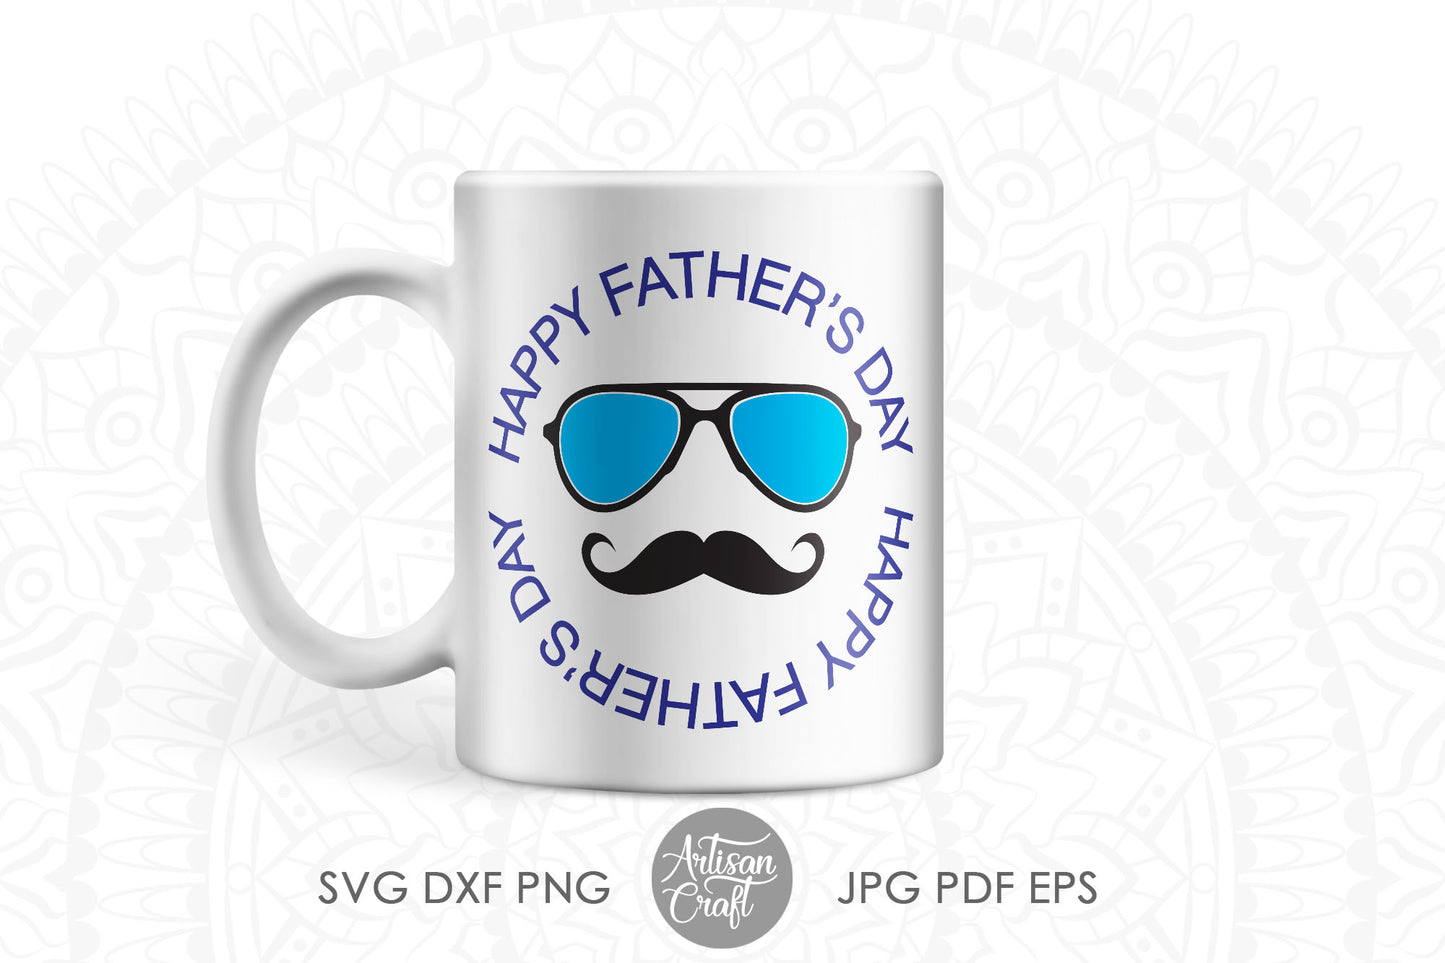 Happy Fathers day SVG with sunglasses & moustache